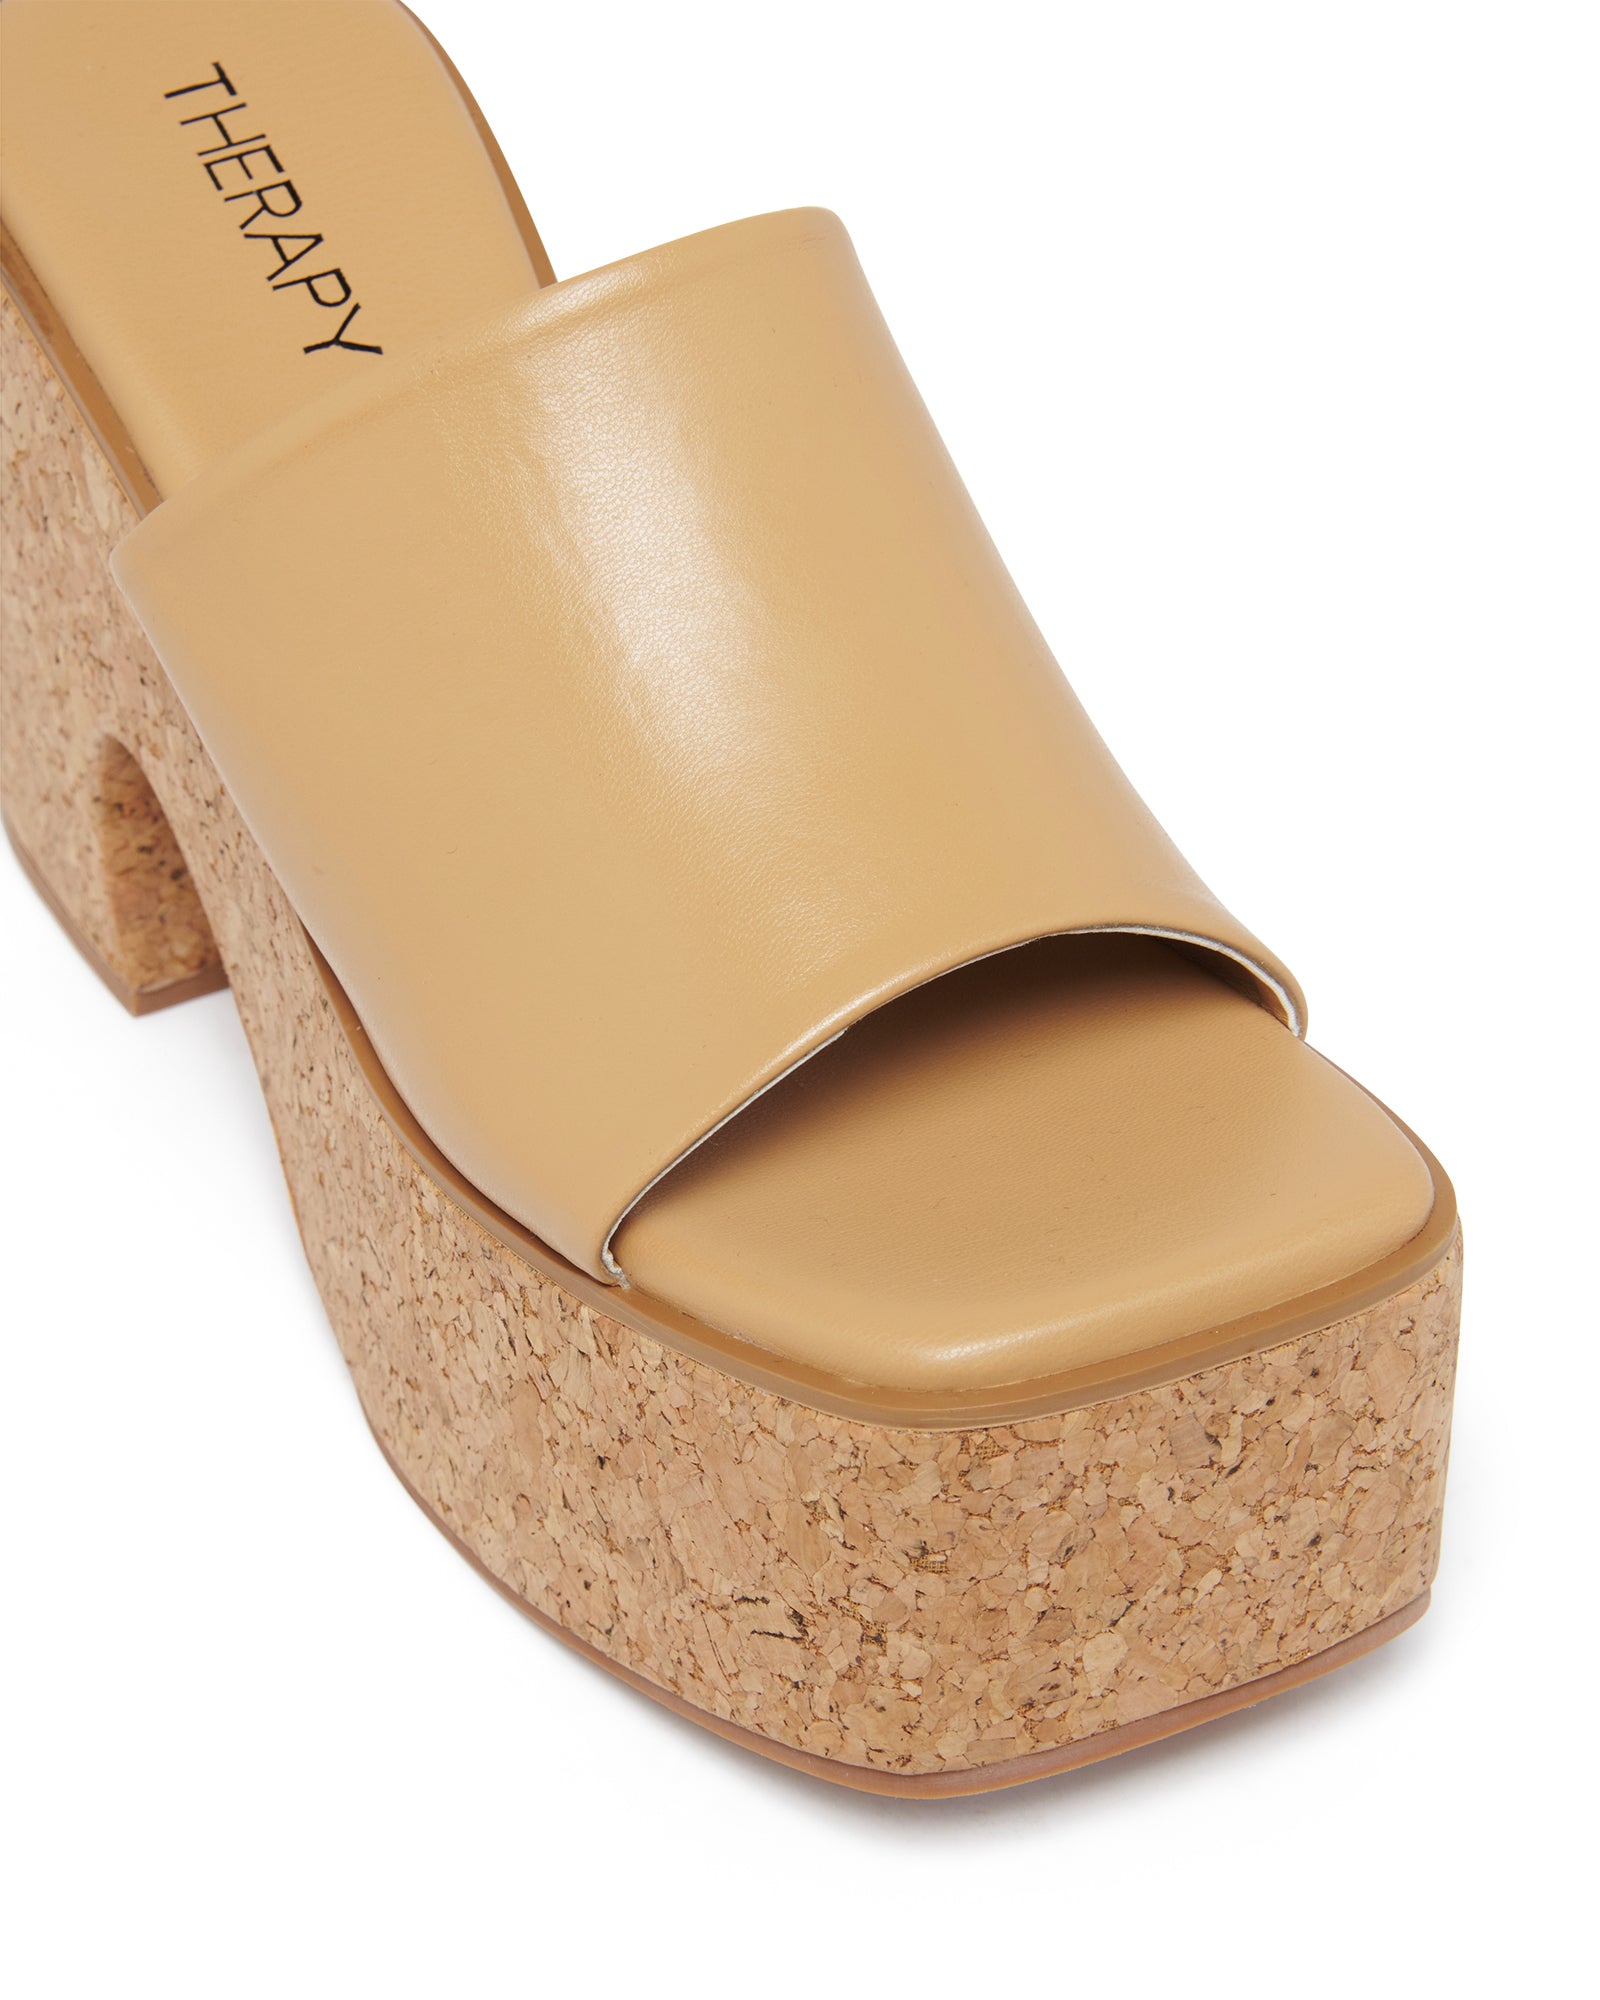 Therapy Shoes Dreamy Caramel Smooth | Women's Heels | Sandals | Platform | Mule